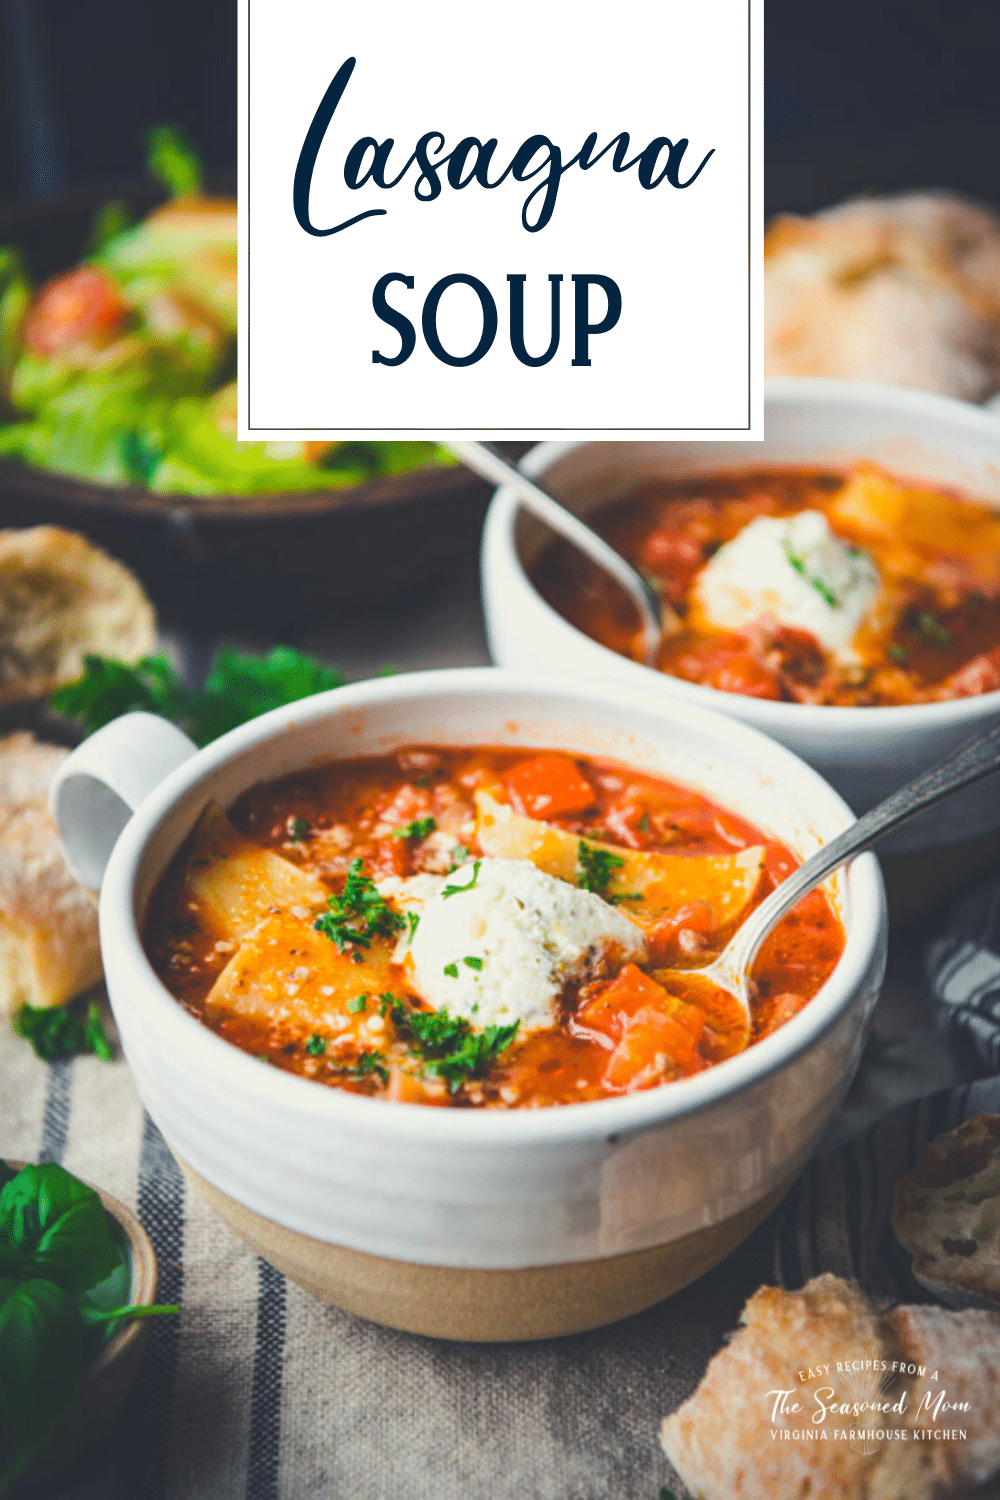 Lasagna Soup {Slow Cooker or Stovetop} - The Seasoned Mom